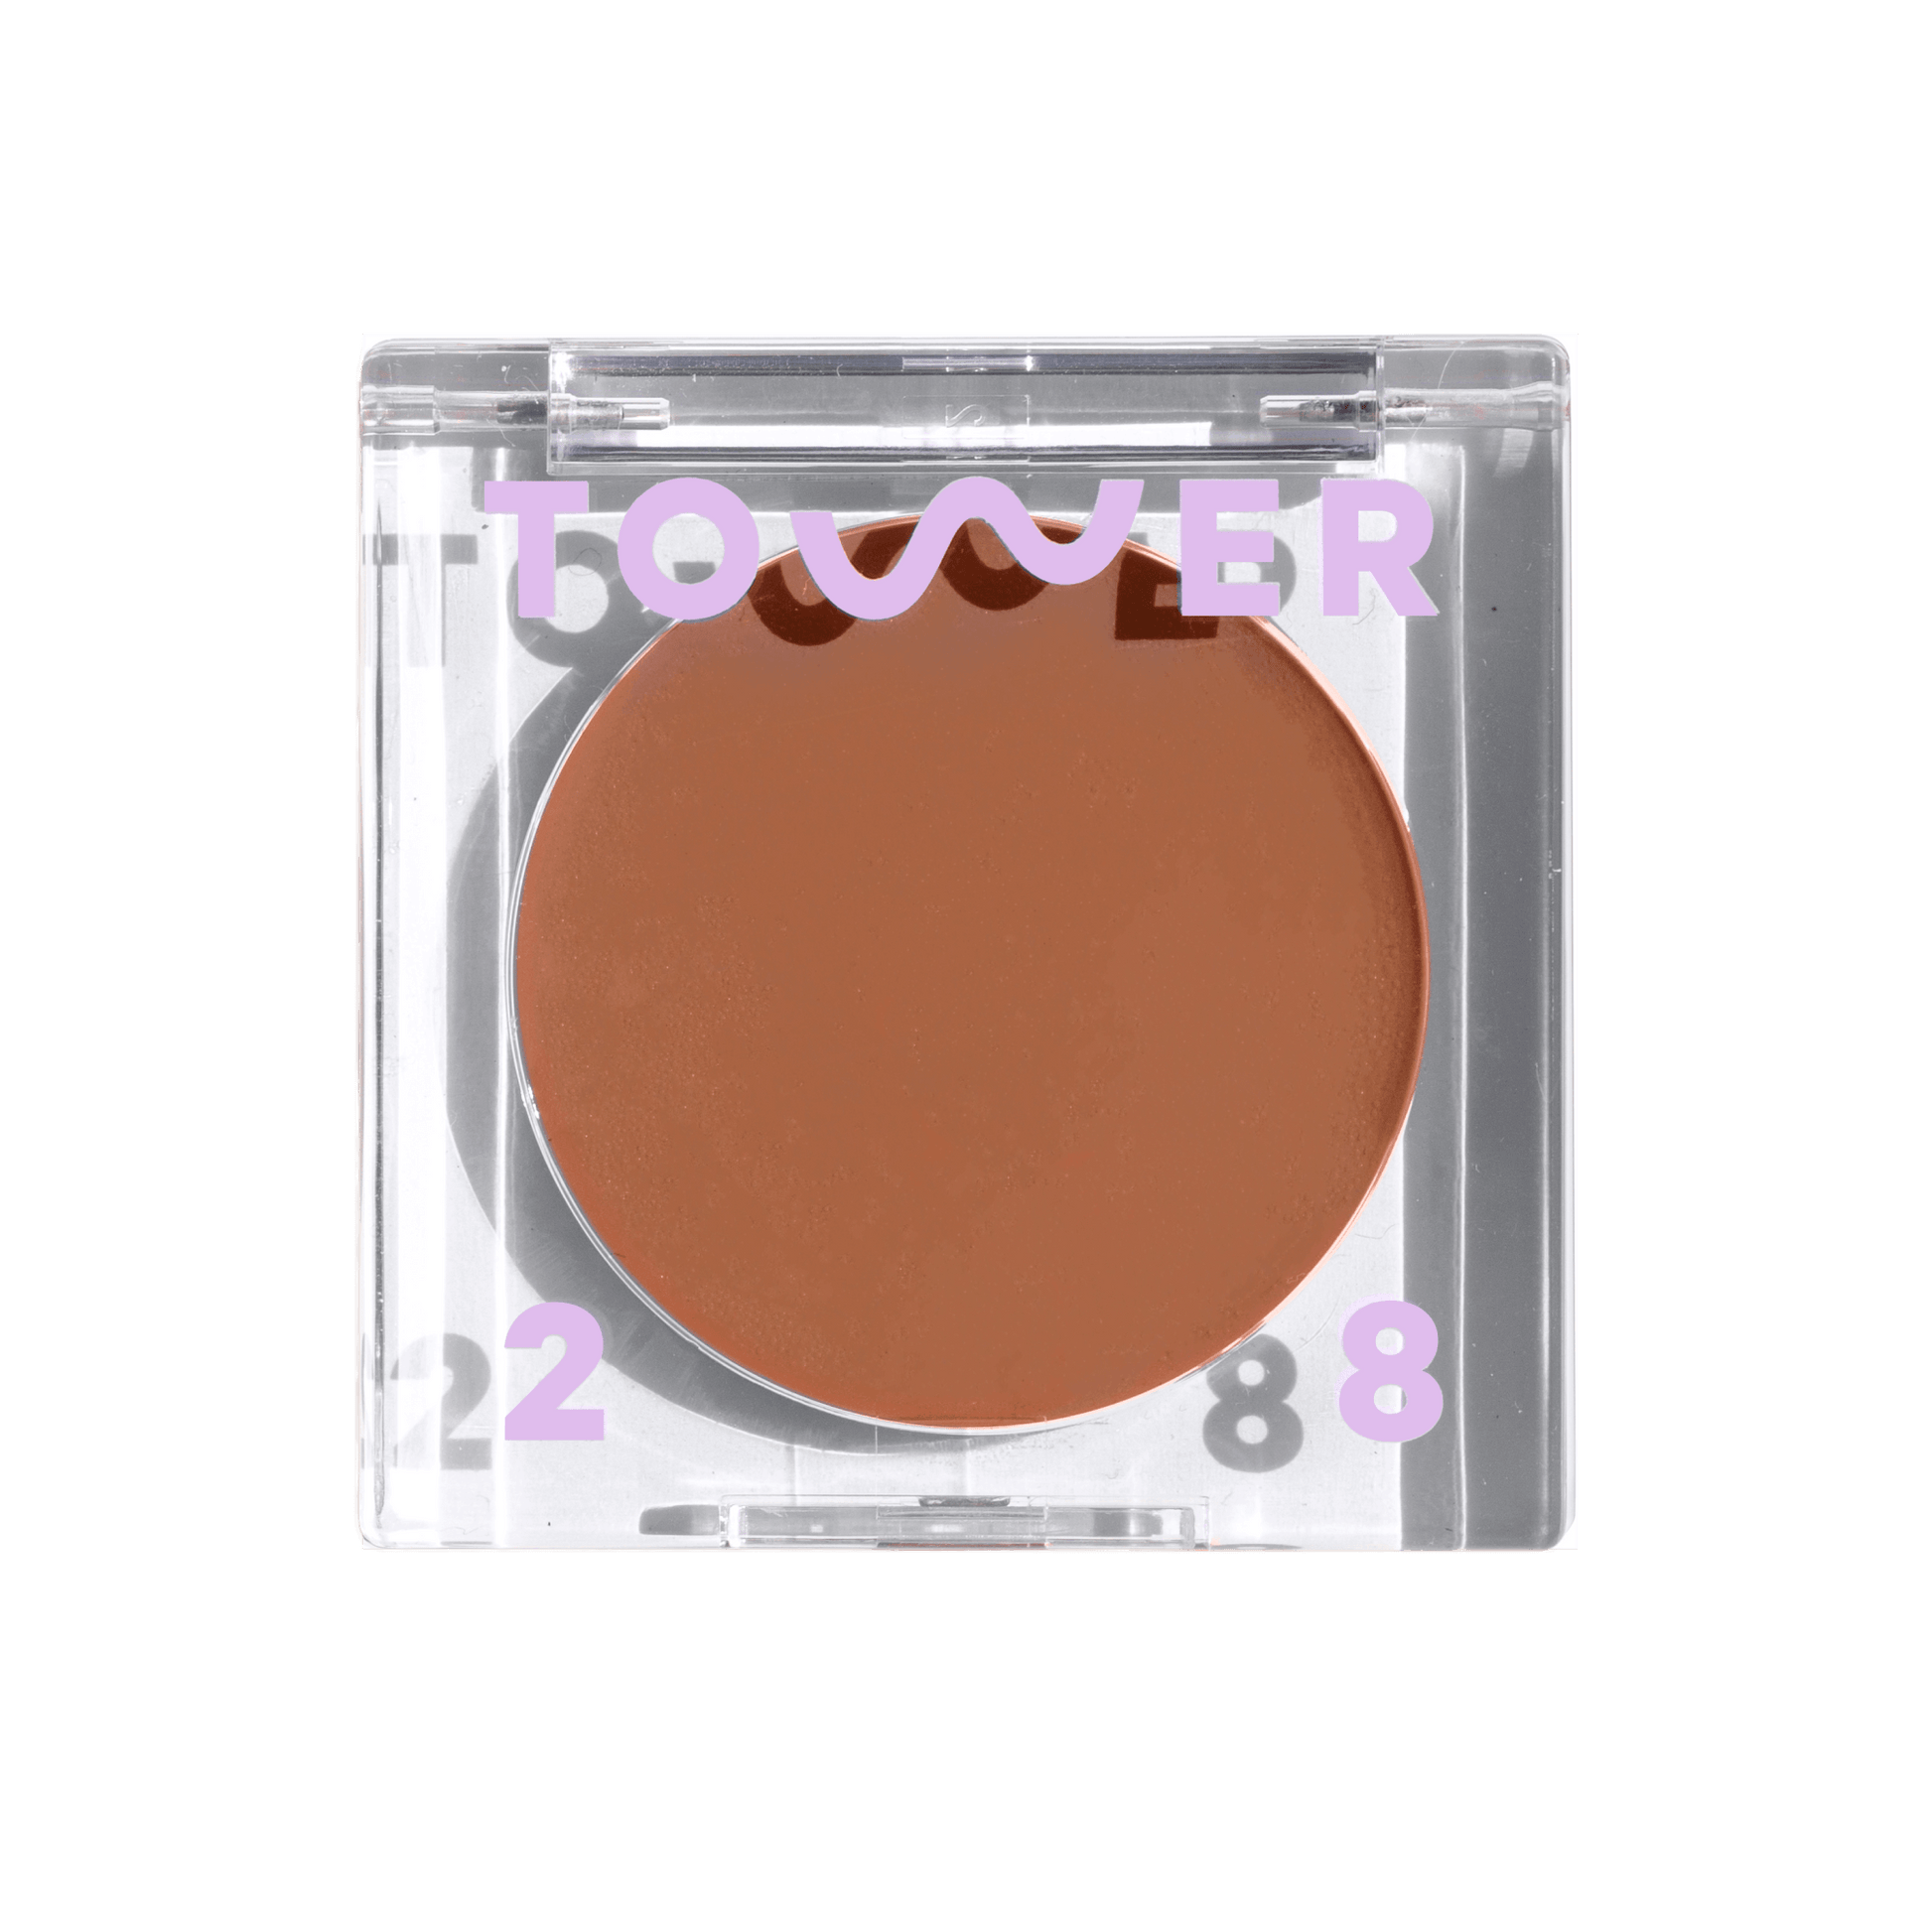 The Tower 28 Beauty Sculptino™ Cream Contour in the shade Getty